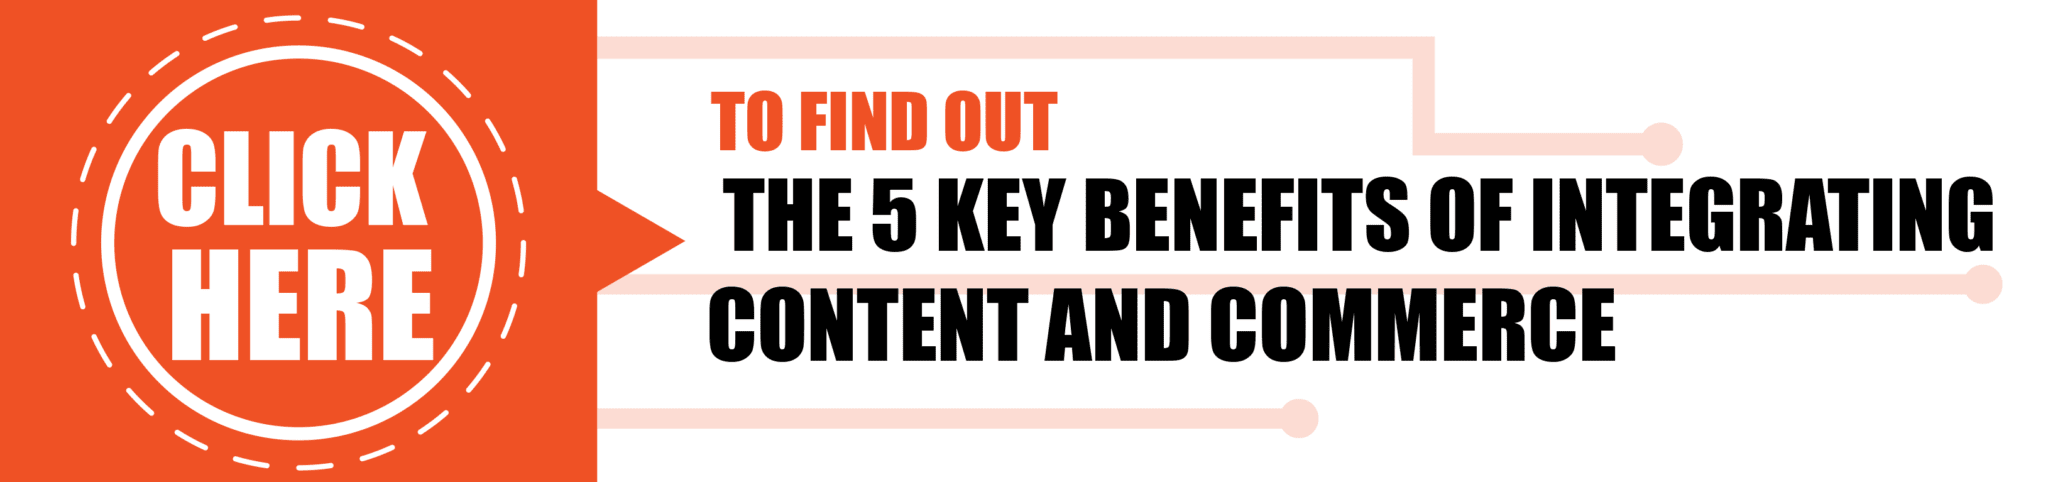 The 5 Key Benefits of Integrating Content and Commerce